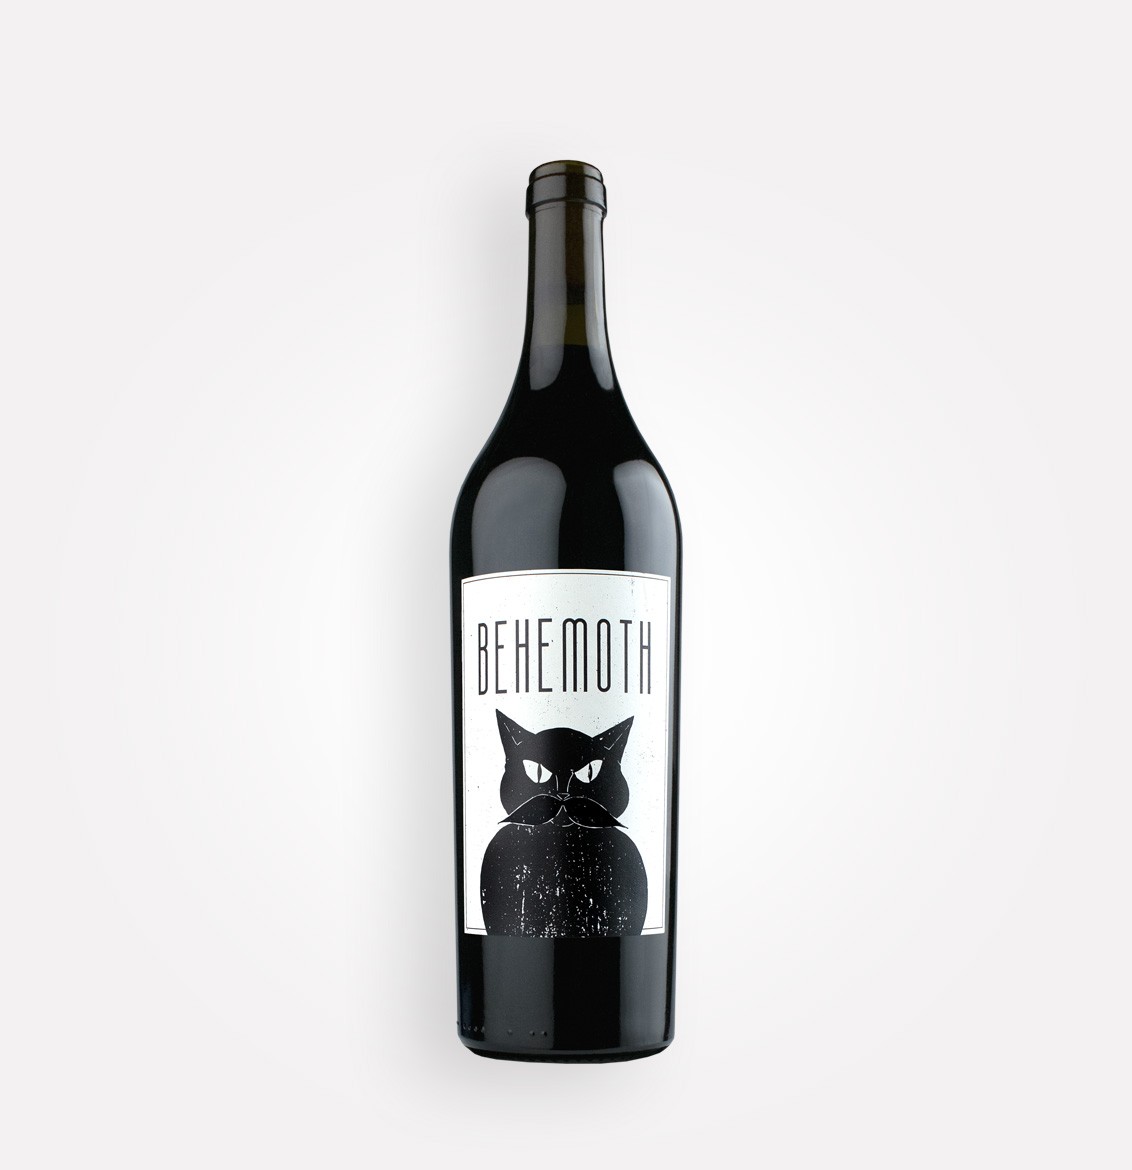 Bottle of Wautoma Springs 2018 The Behemoth Reserve Cabernet Sauvignon wine from Washington's Columbia Valley